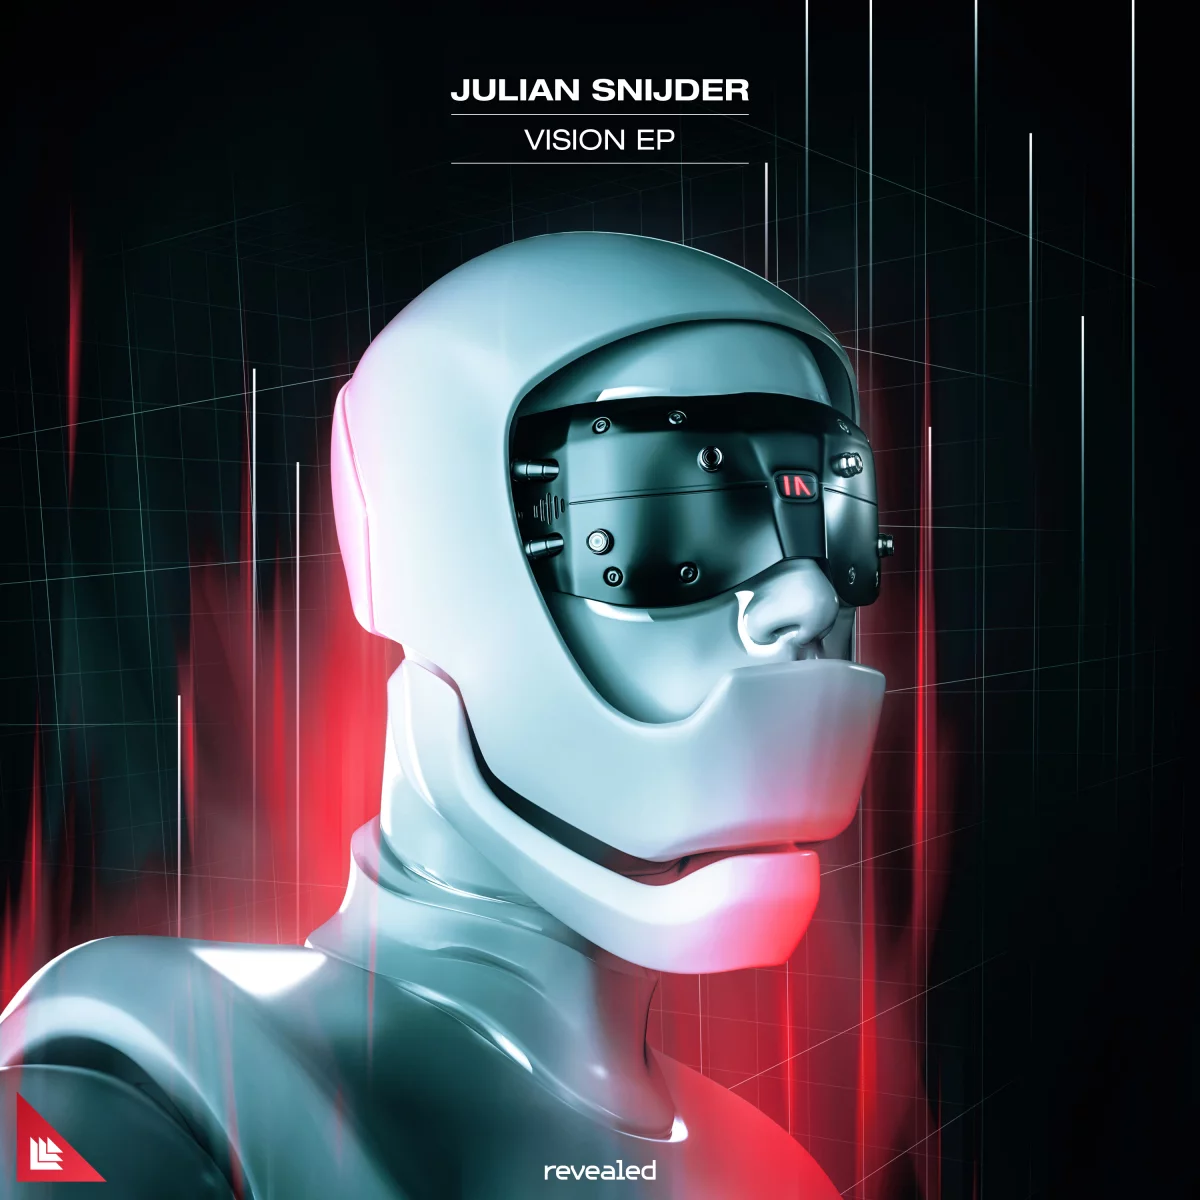 Vision EP - Julian Snijder⁠ 